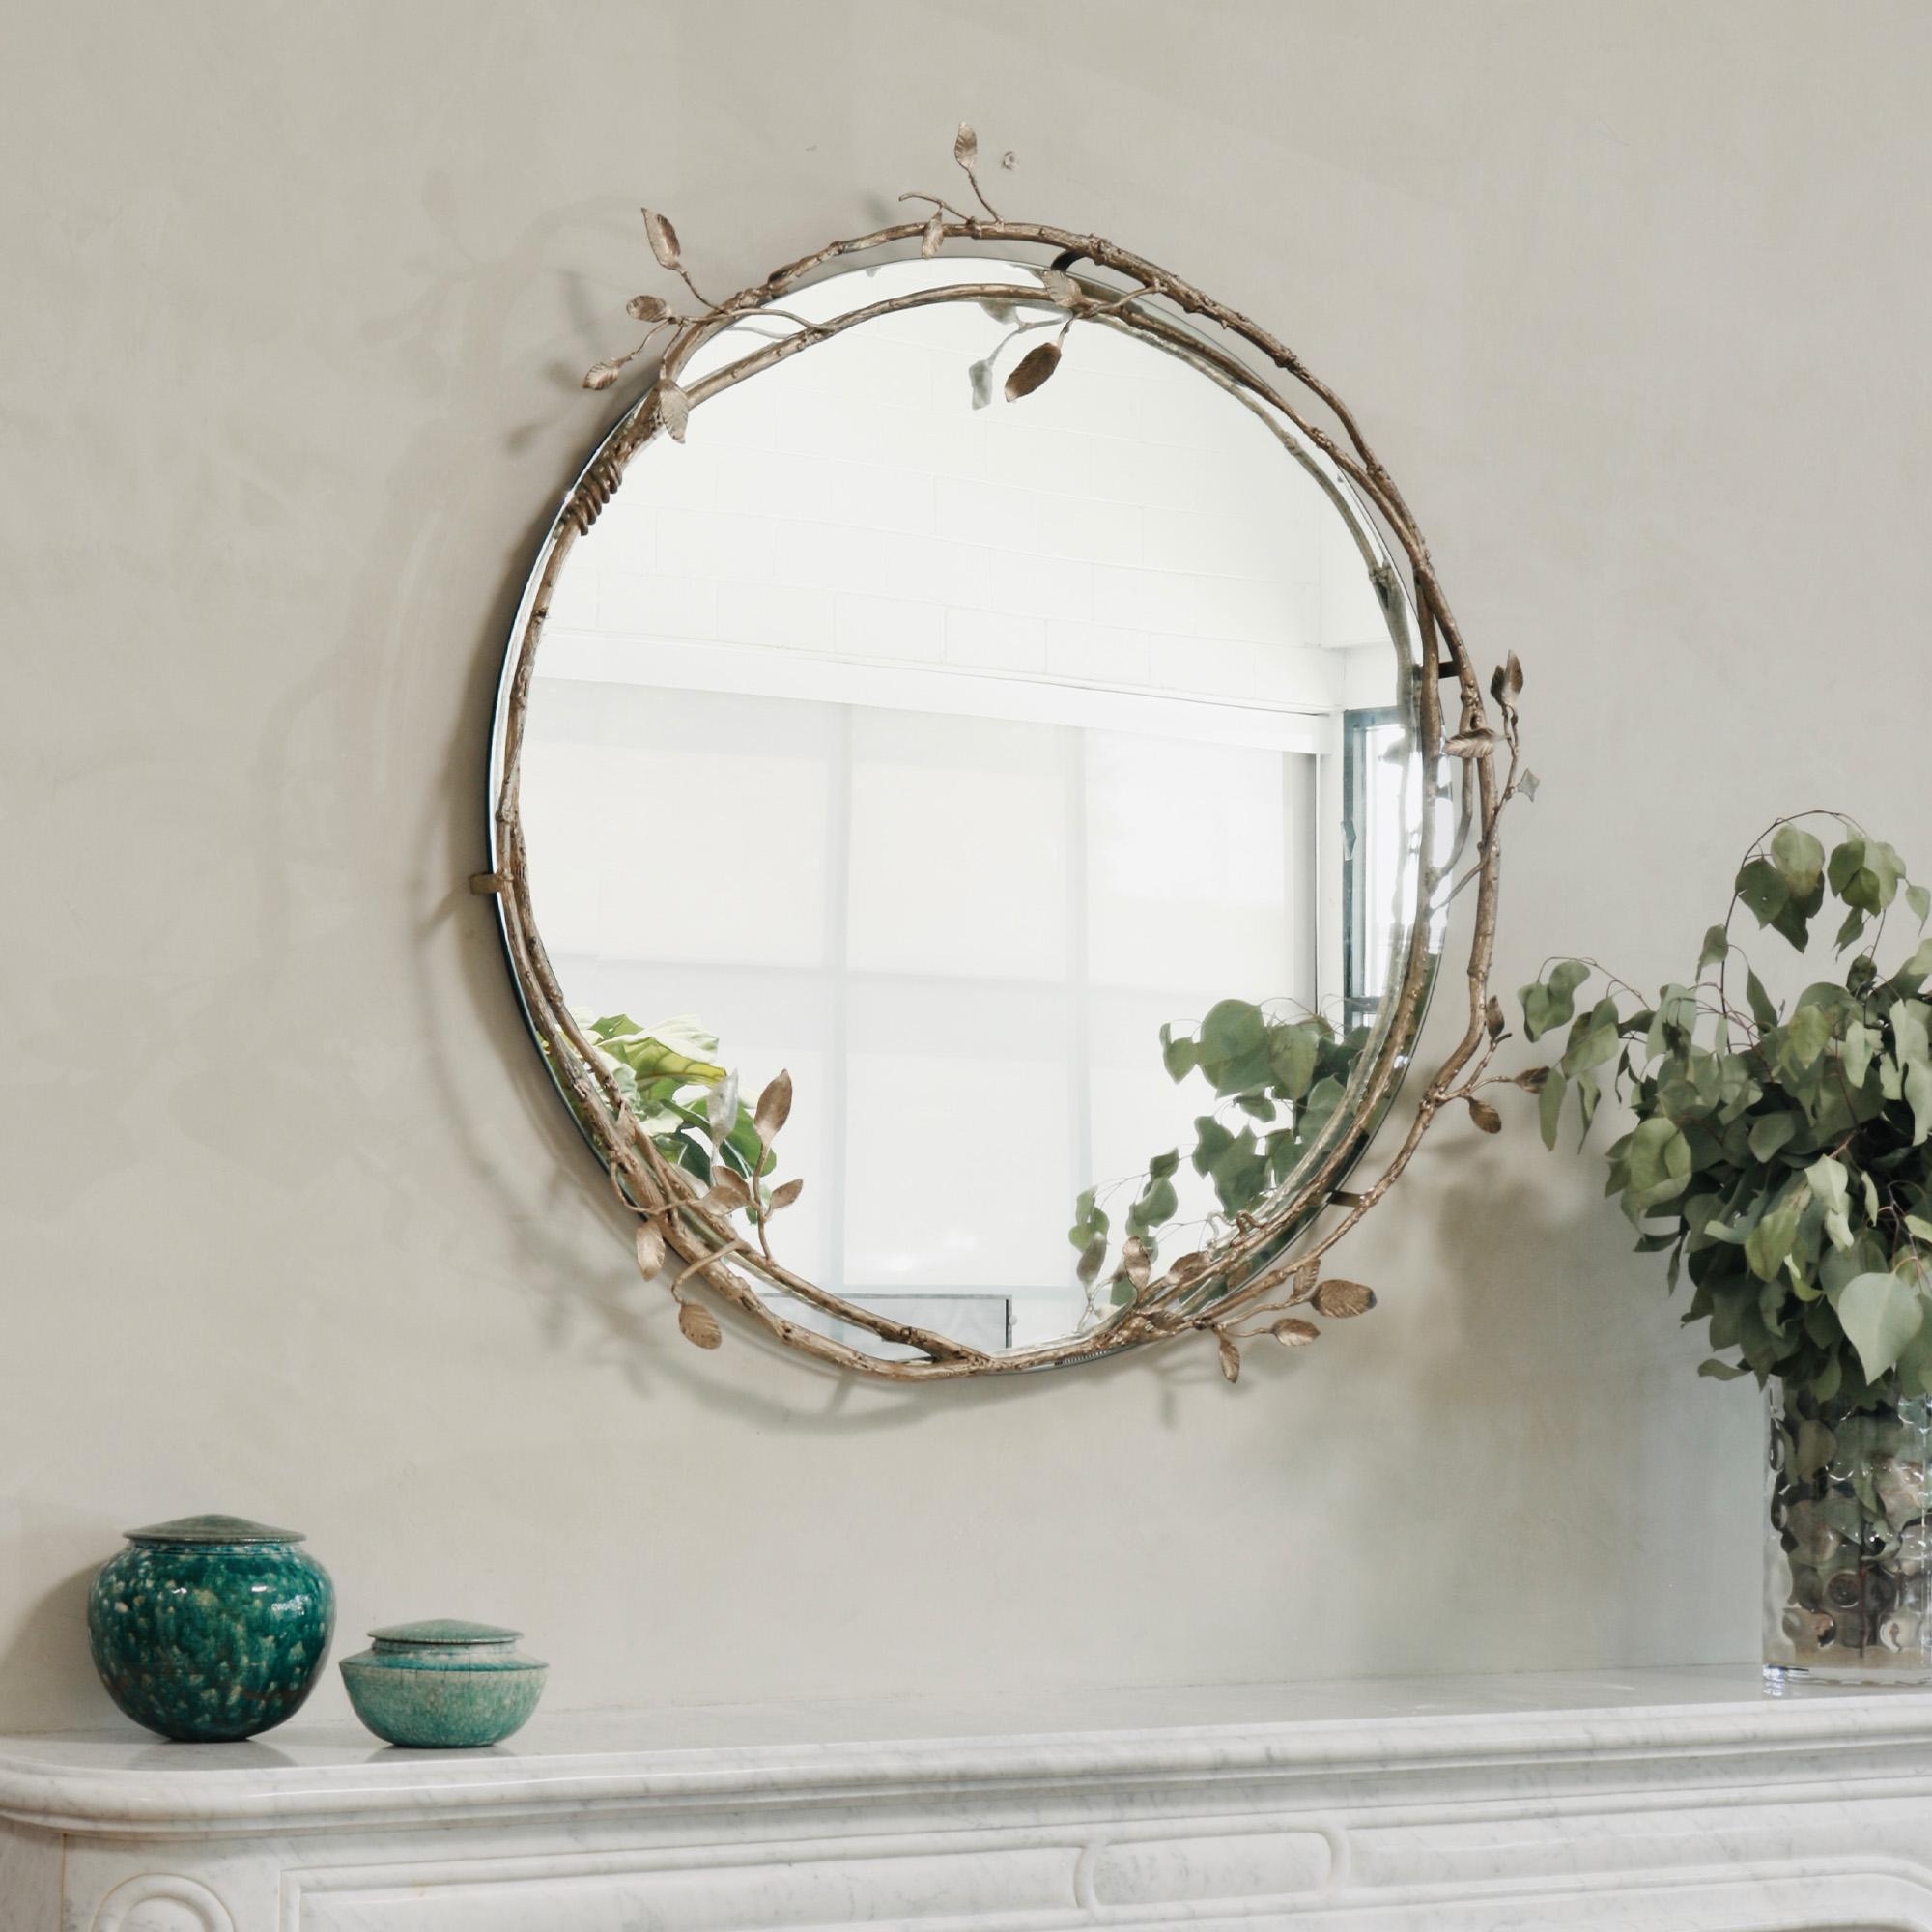 Nestled within the embrace of meticulously crafted branches, the Lennox Mirror weaves one of a kind metal artistry into living spaces. Every leaf, a work of precision, is thoughtfully arranged to reveal lifelike textures and intricate details,